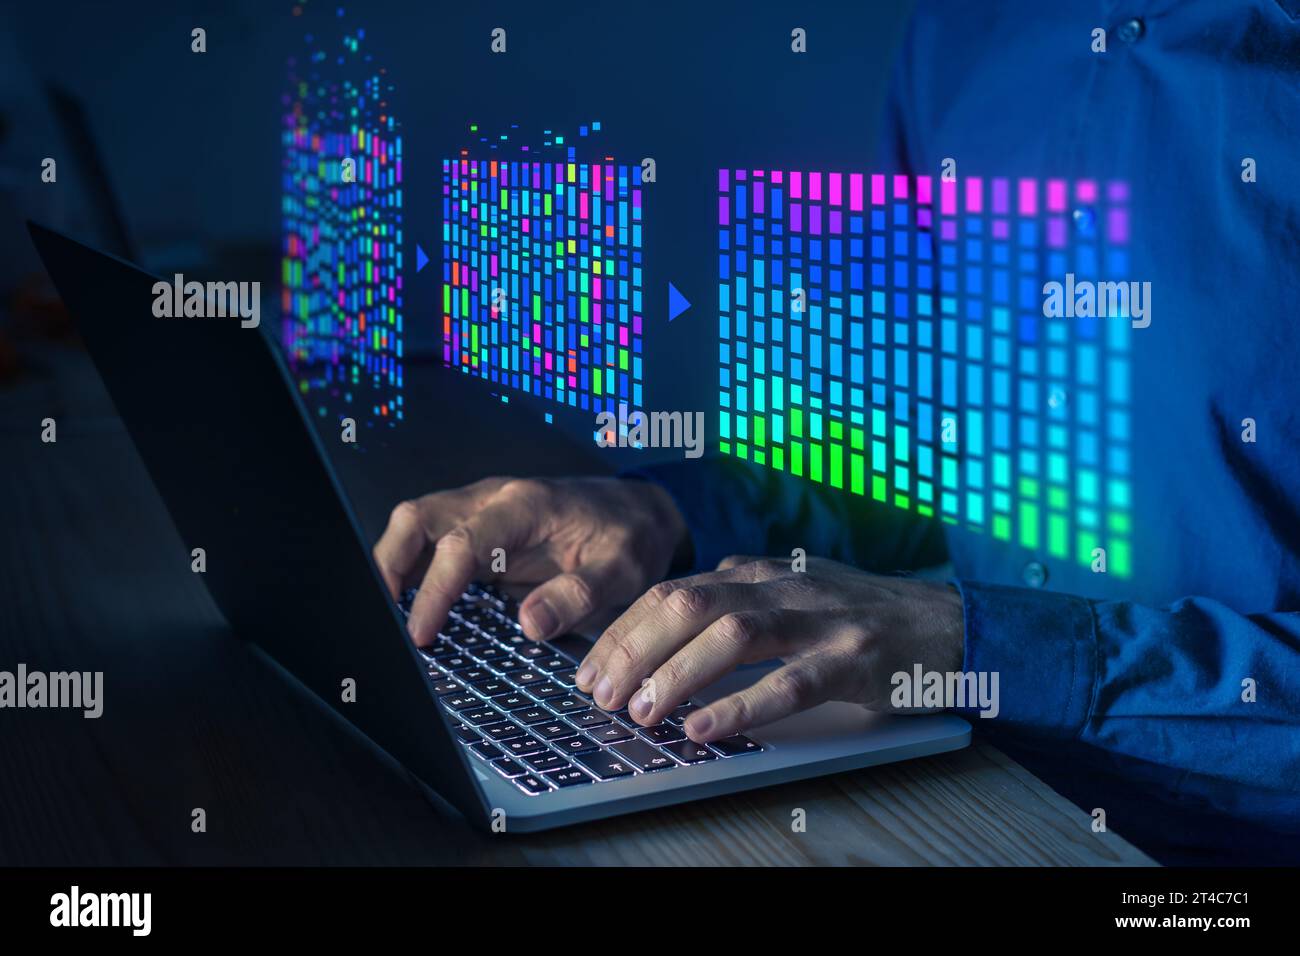 Big data and AI technology. Data science and data analytics. Scientist analysing complex data set on computer. Data mining, artificial intelligence, m Stock Photo